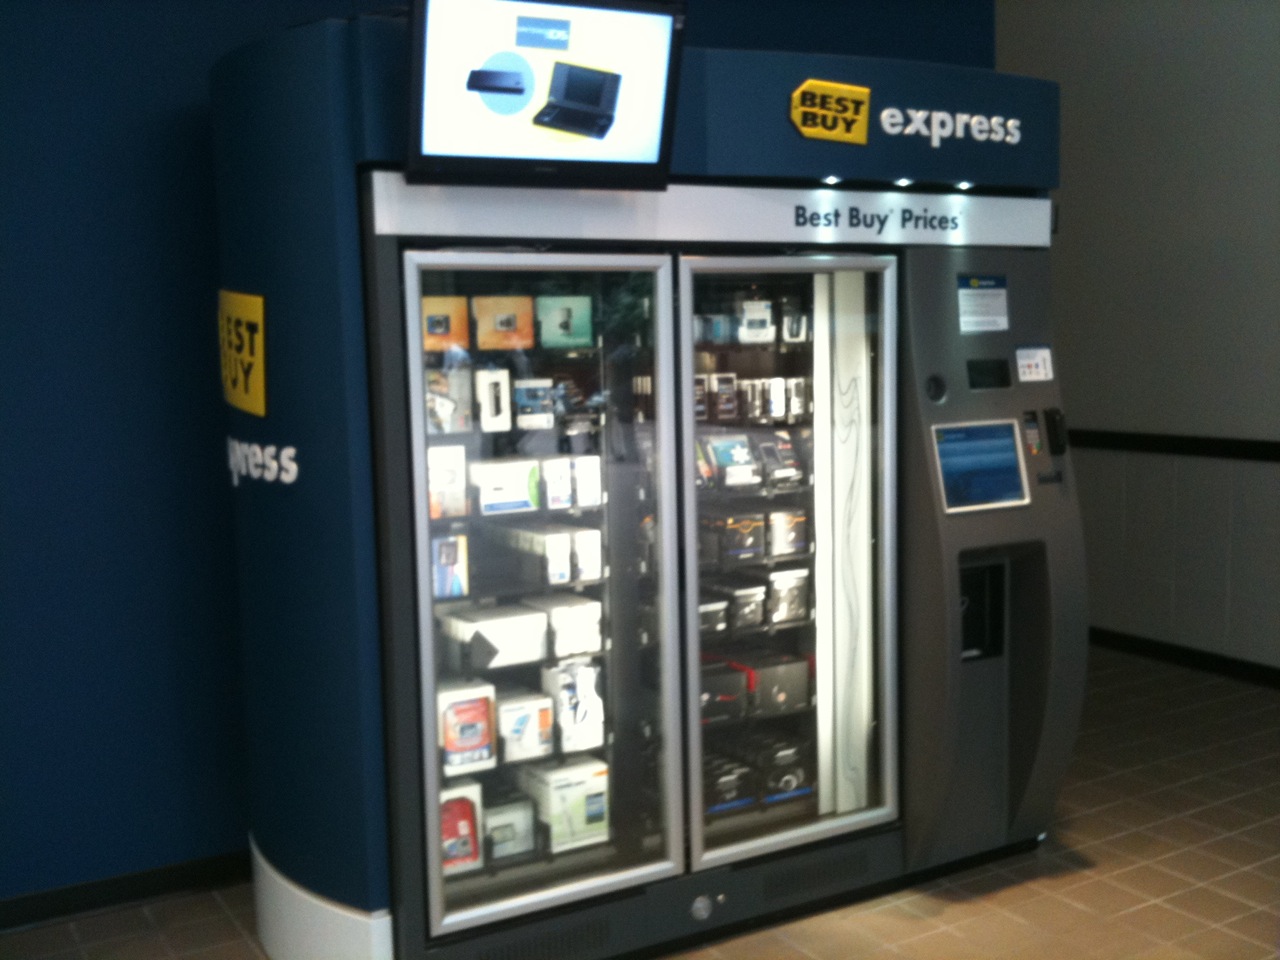 KITCH MELLY: BEST BUY GOES VENDING MACHINE